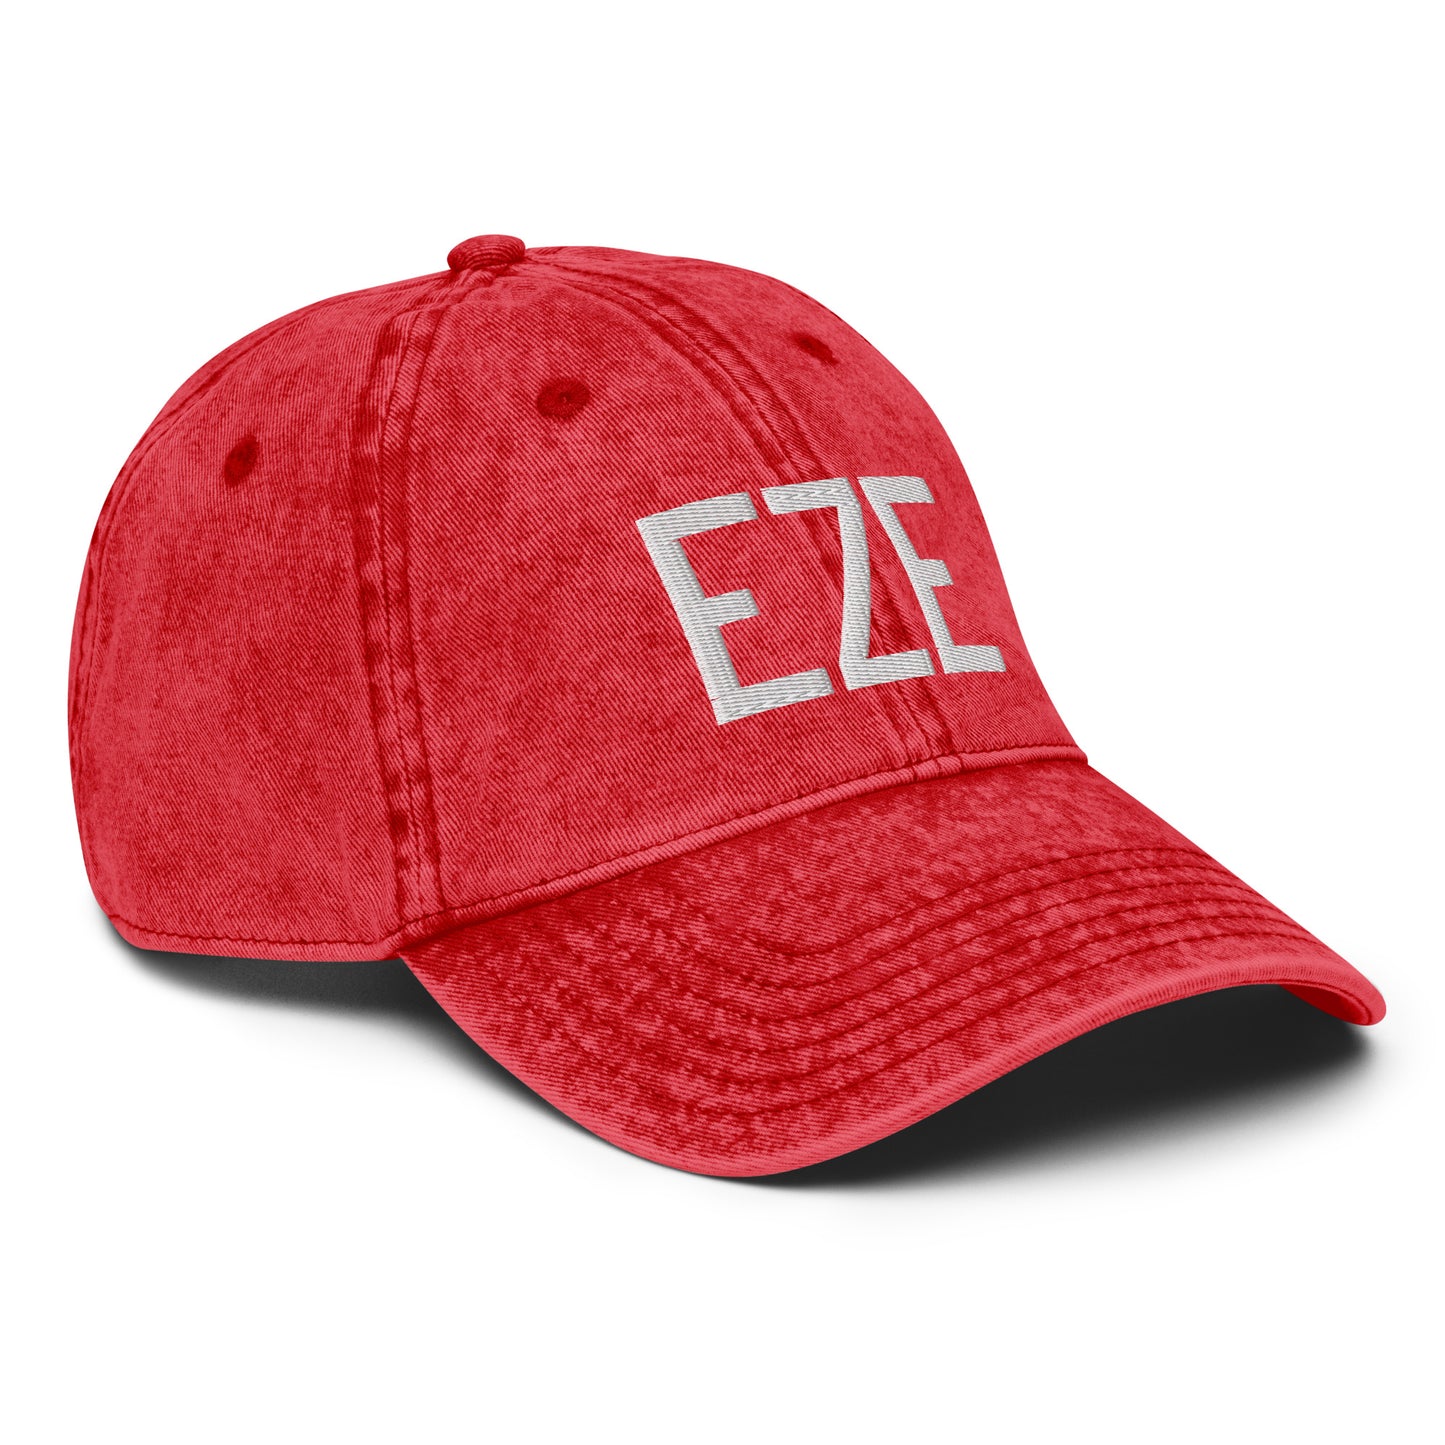 Airport Code Twill Cap - White • EZE Buenos Aires • YHM Designs - Image 24